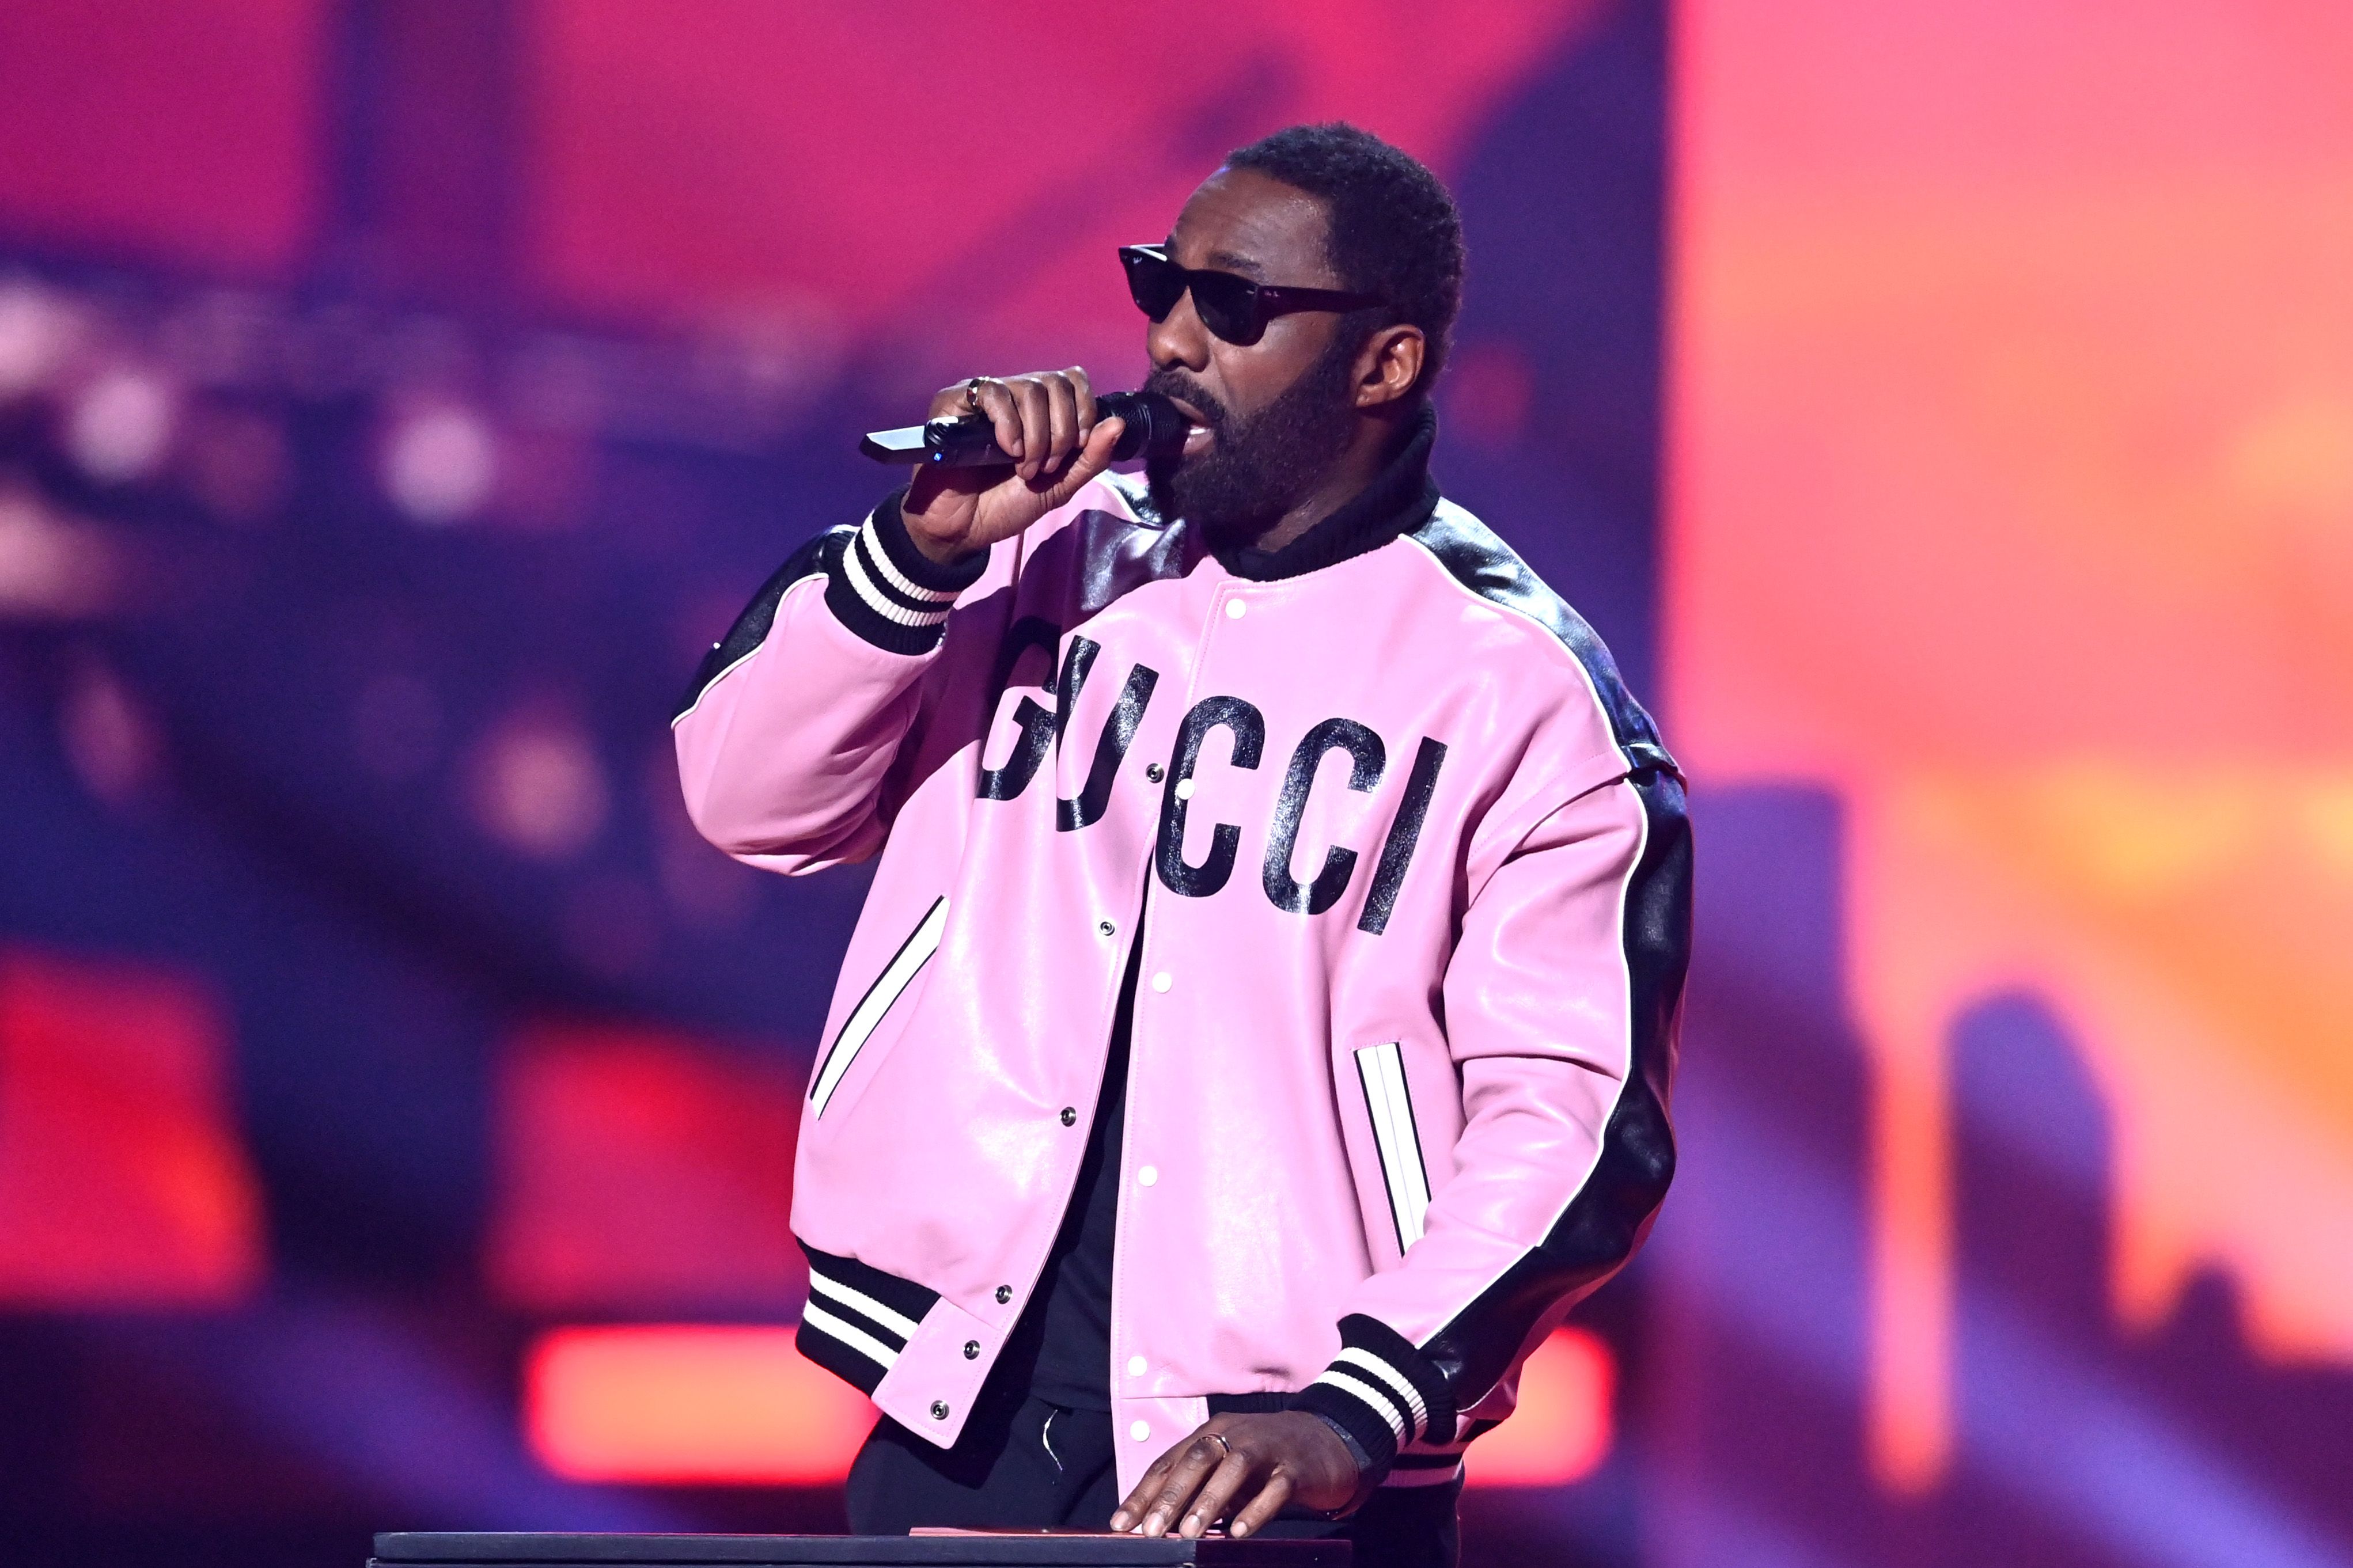 Idris Elba holds a microphone onstage during The BRIT Awards 2022